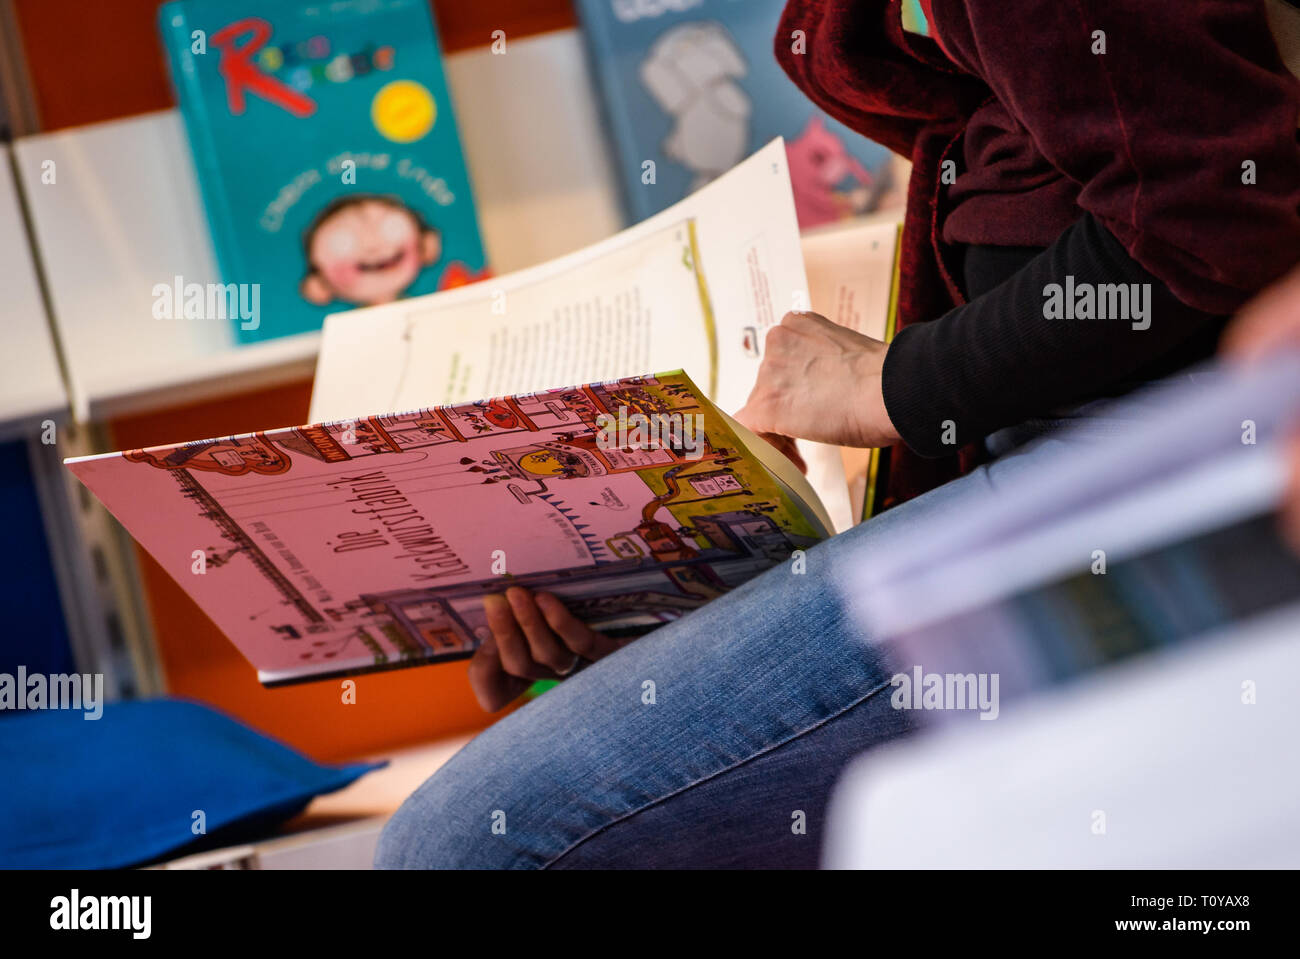 Leipzig, Germany. 21st Mar, 2019. A visitor reads a book at the booth of Klett during the 2019 Leipzig Book Fair in Leipzig, Germany, March 21, 2019. The four-day Leipzig Book Fair kicked off on Thursday, attracting over 2,500 exhibitors from more than 50 countries and regions all over the world. Credit: Kevin Voigt/Xinhua/Alamy Live News Stock Photo